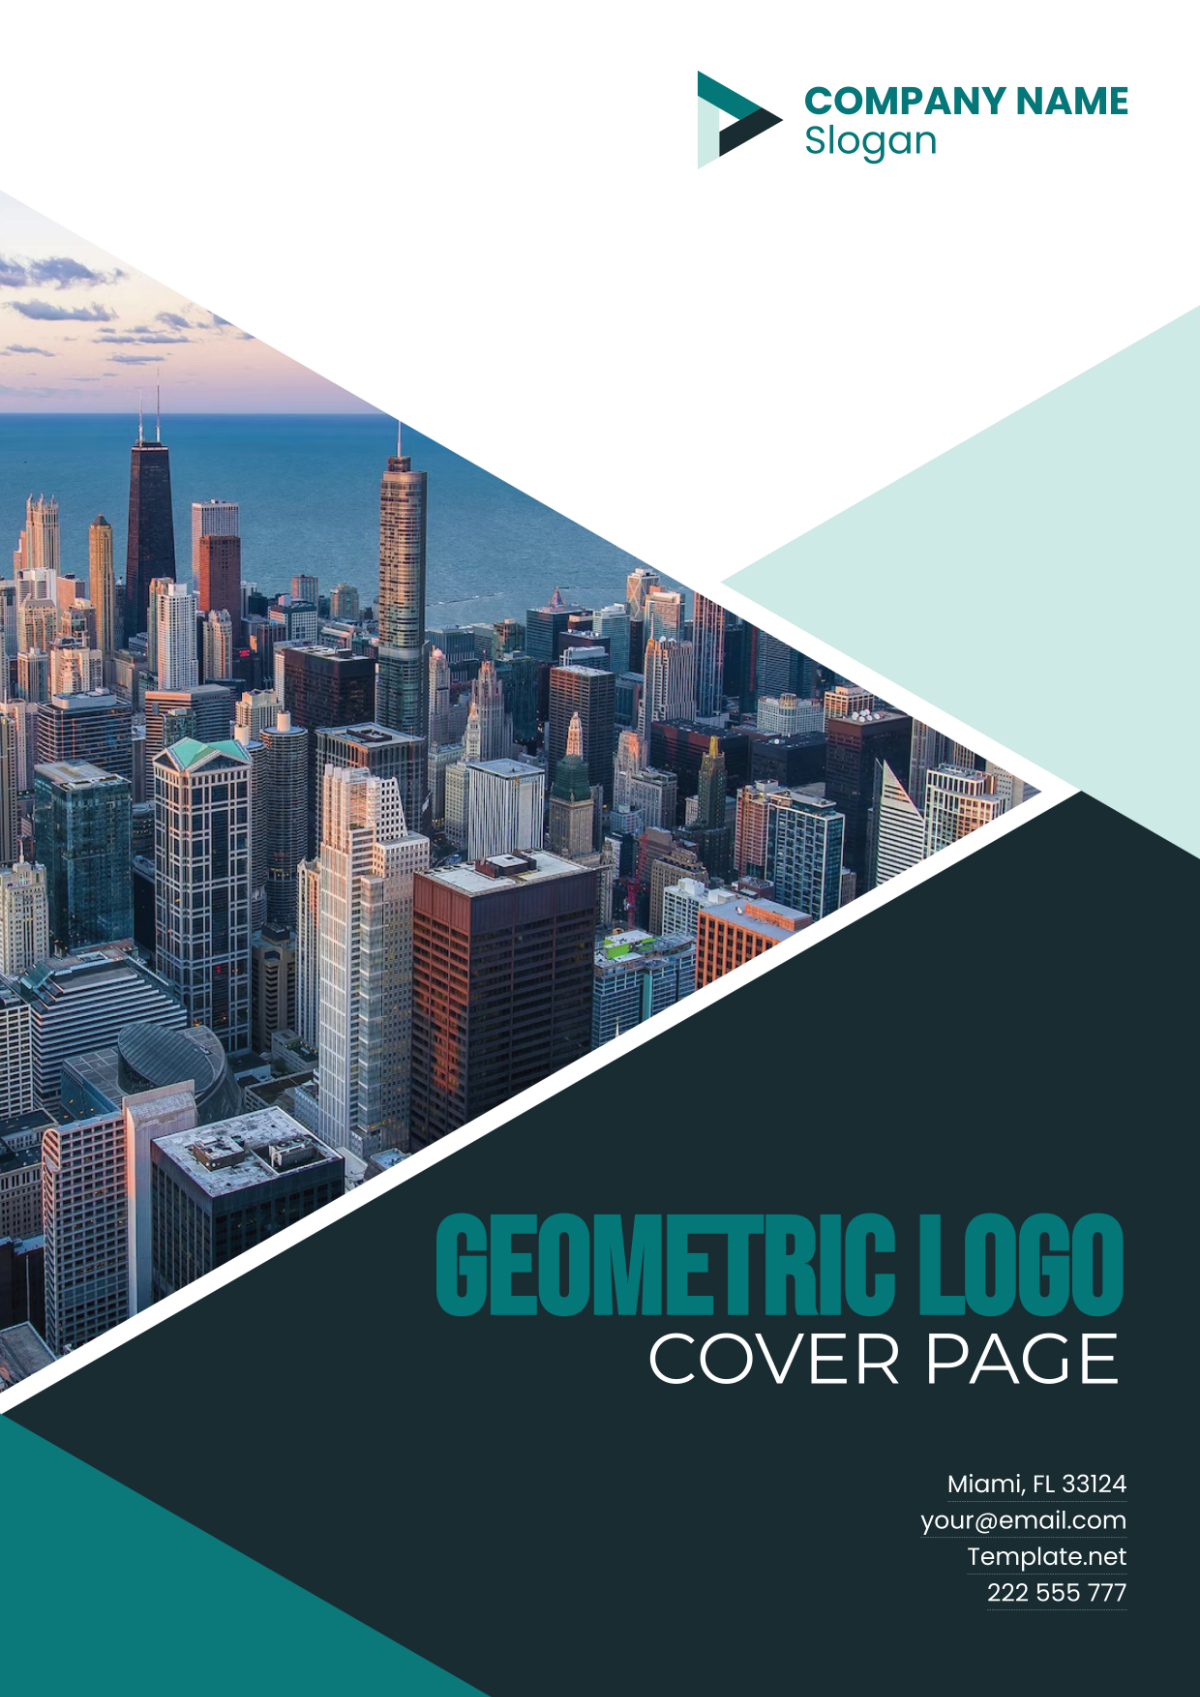 Geometric Logo Cover Page